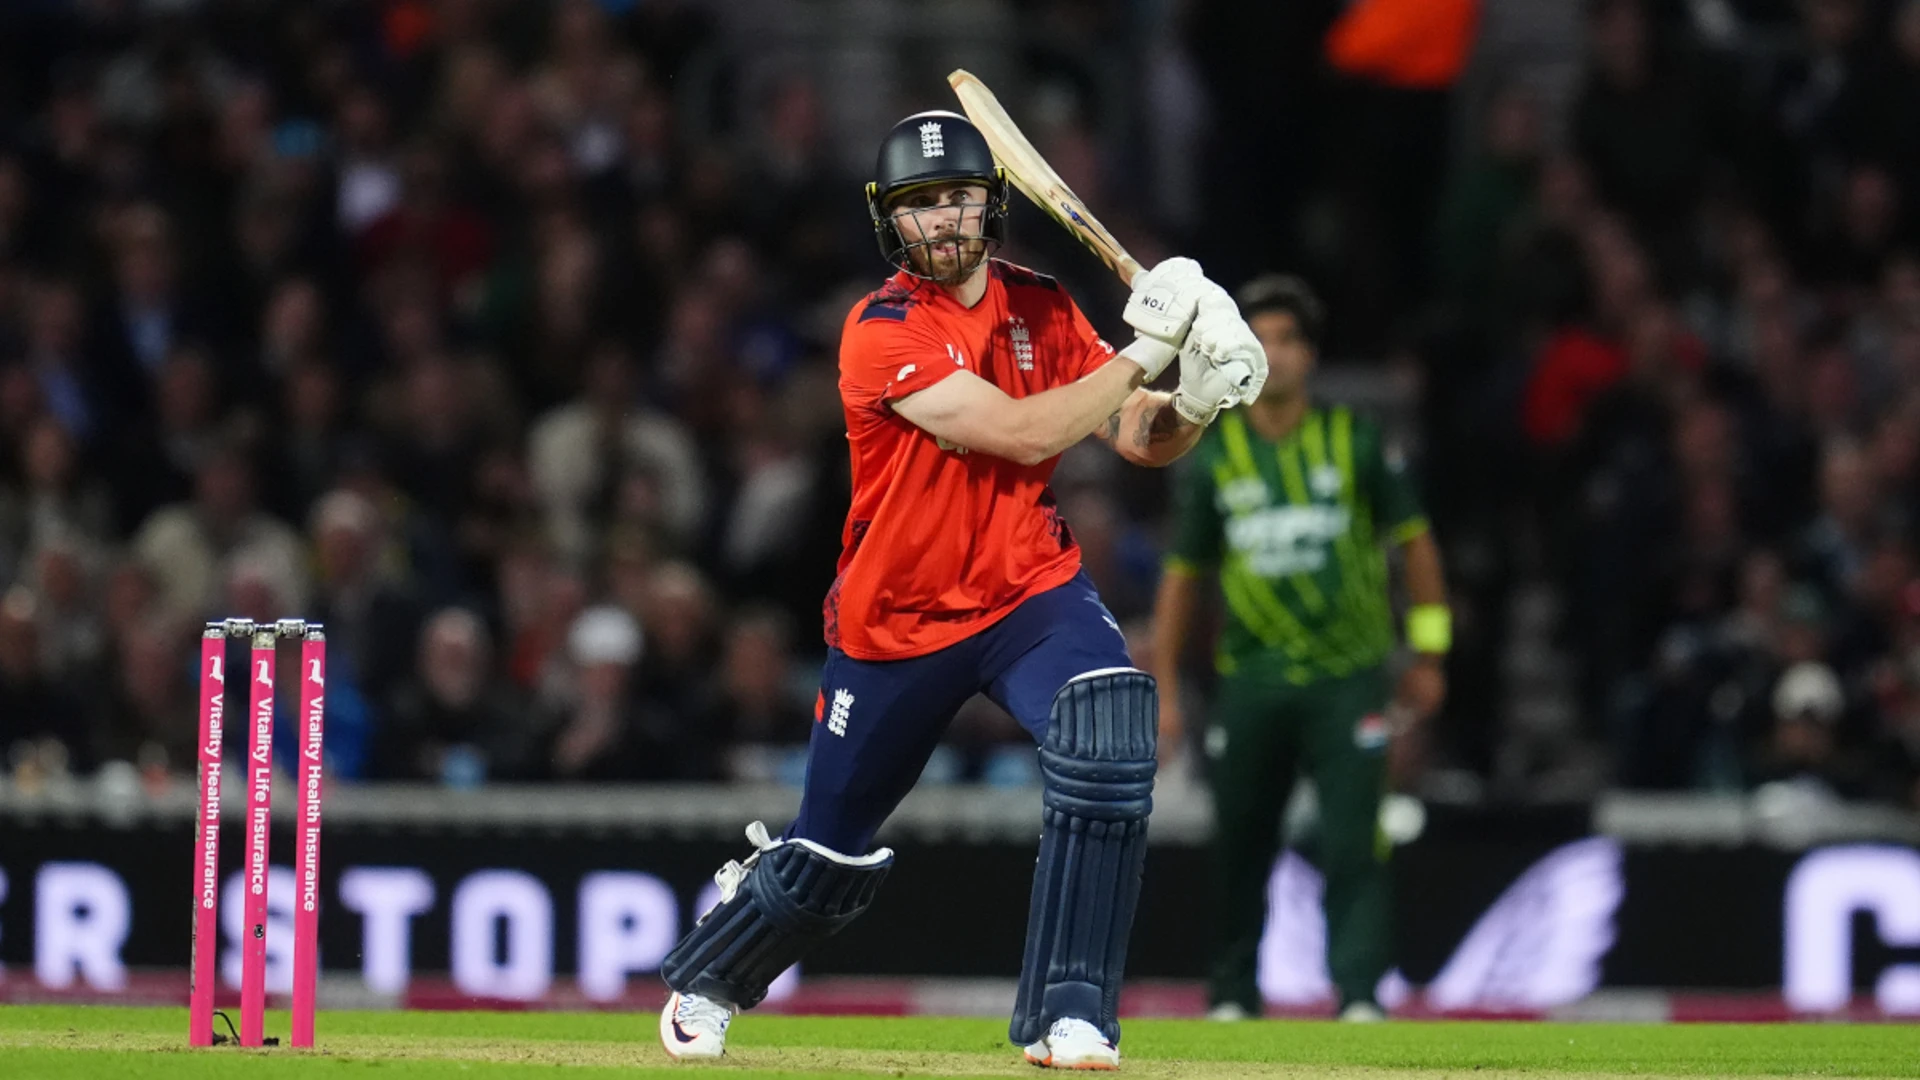 England overwhelm Pakistan in final T20 before World Cup defence